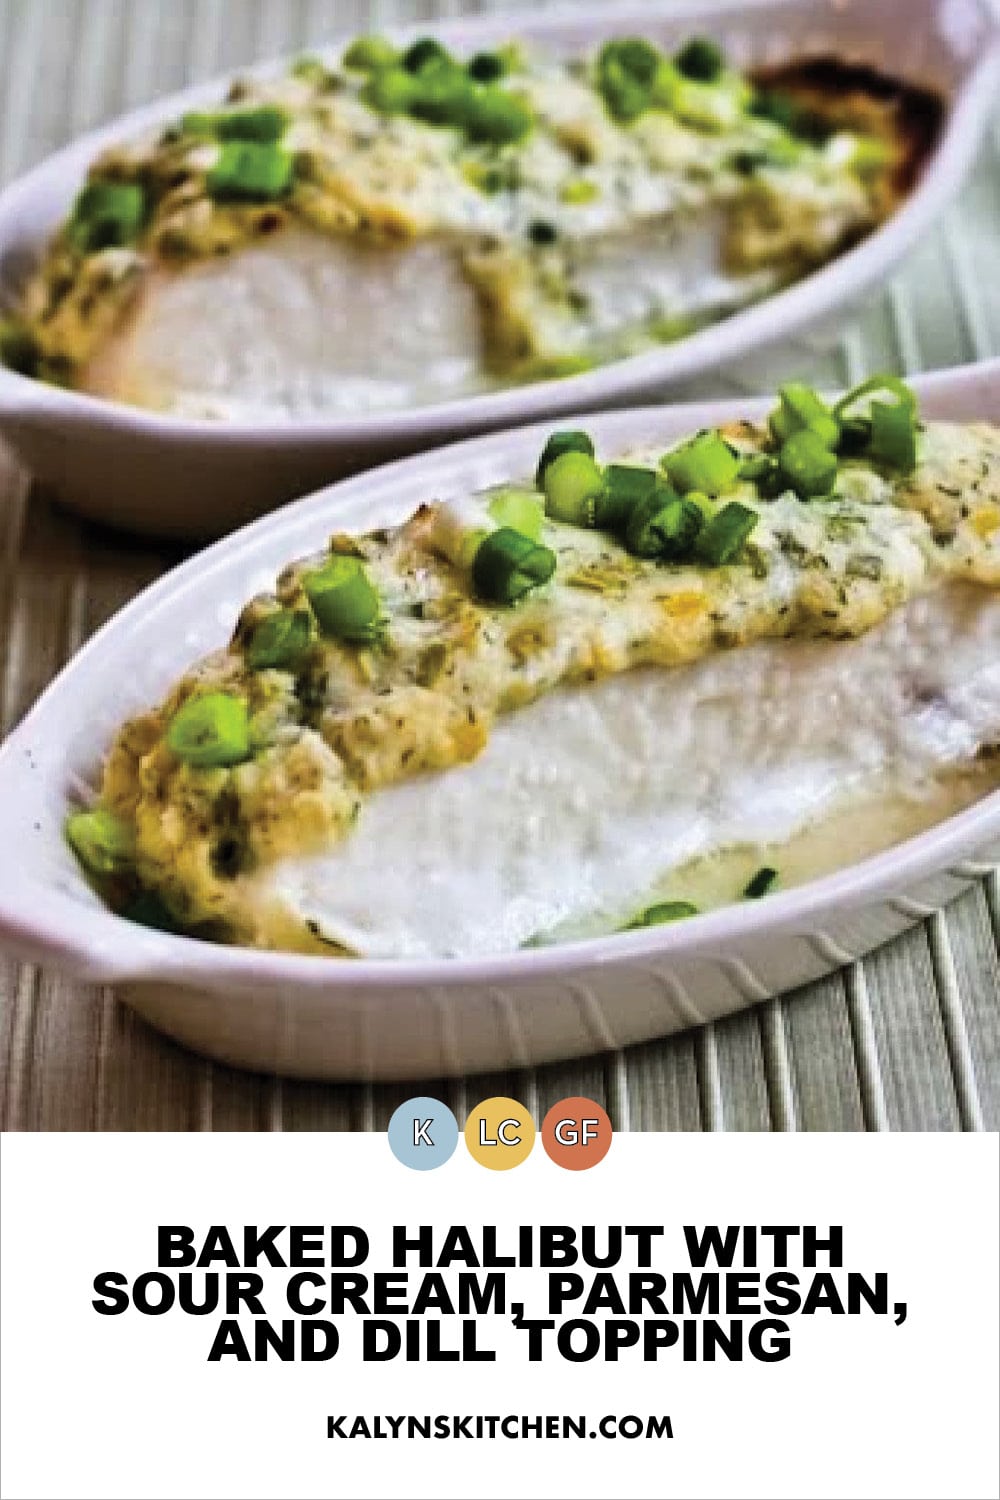 Pinterest image of Baked Halibut with Sour Cream, Parmesan, and Dill Topping